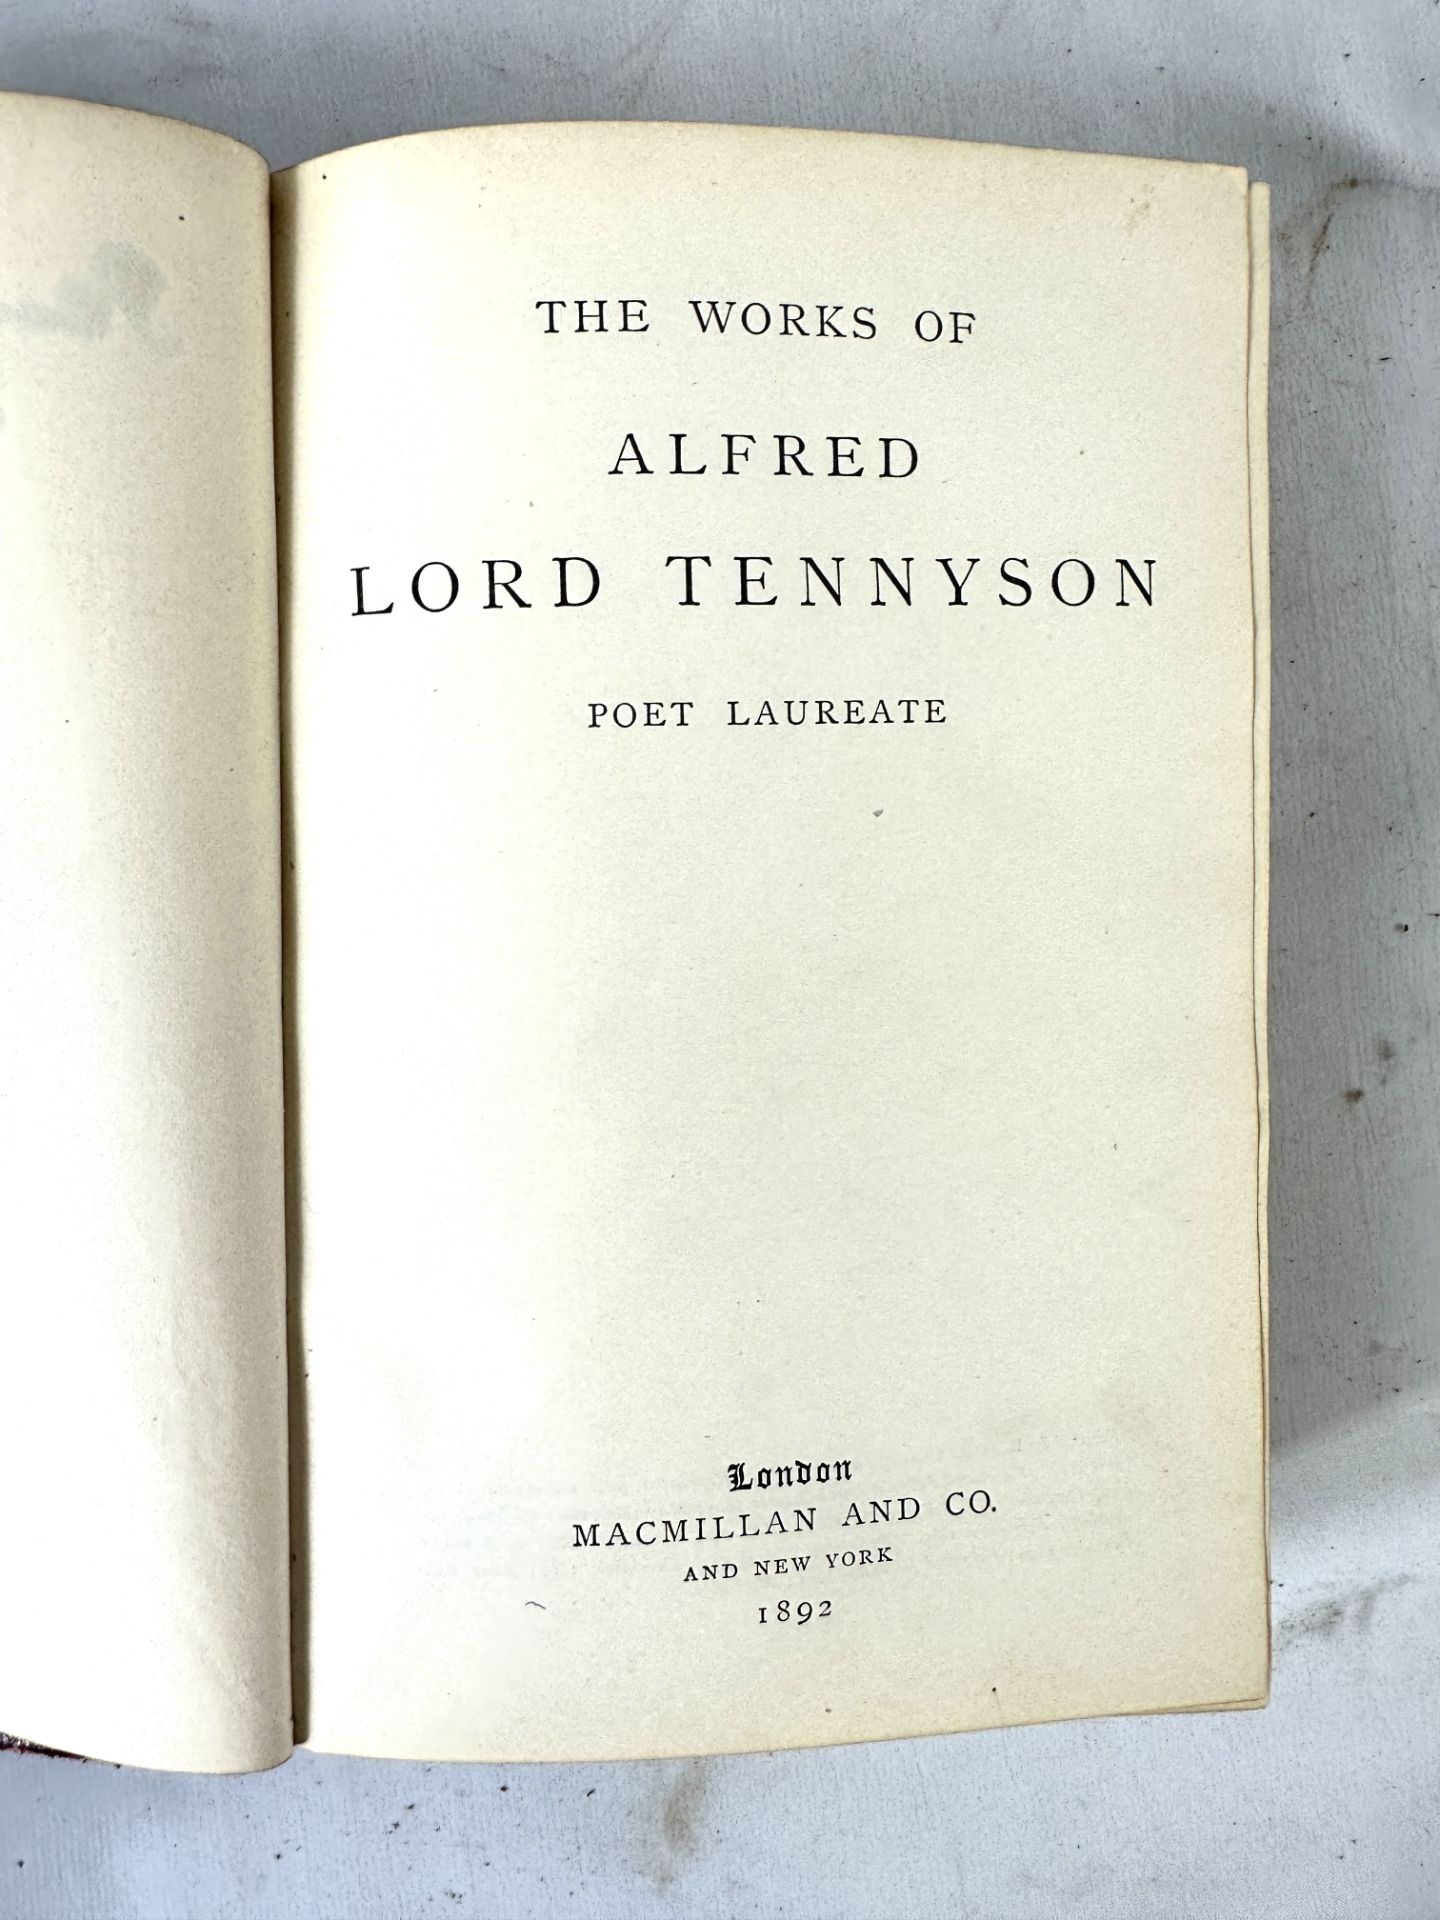 The Works of Alfred Lord Tennyson and other books - Image 4 of 4